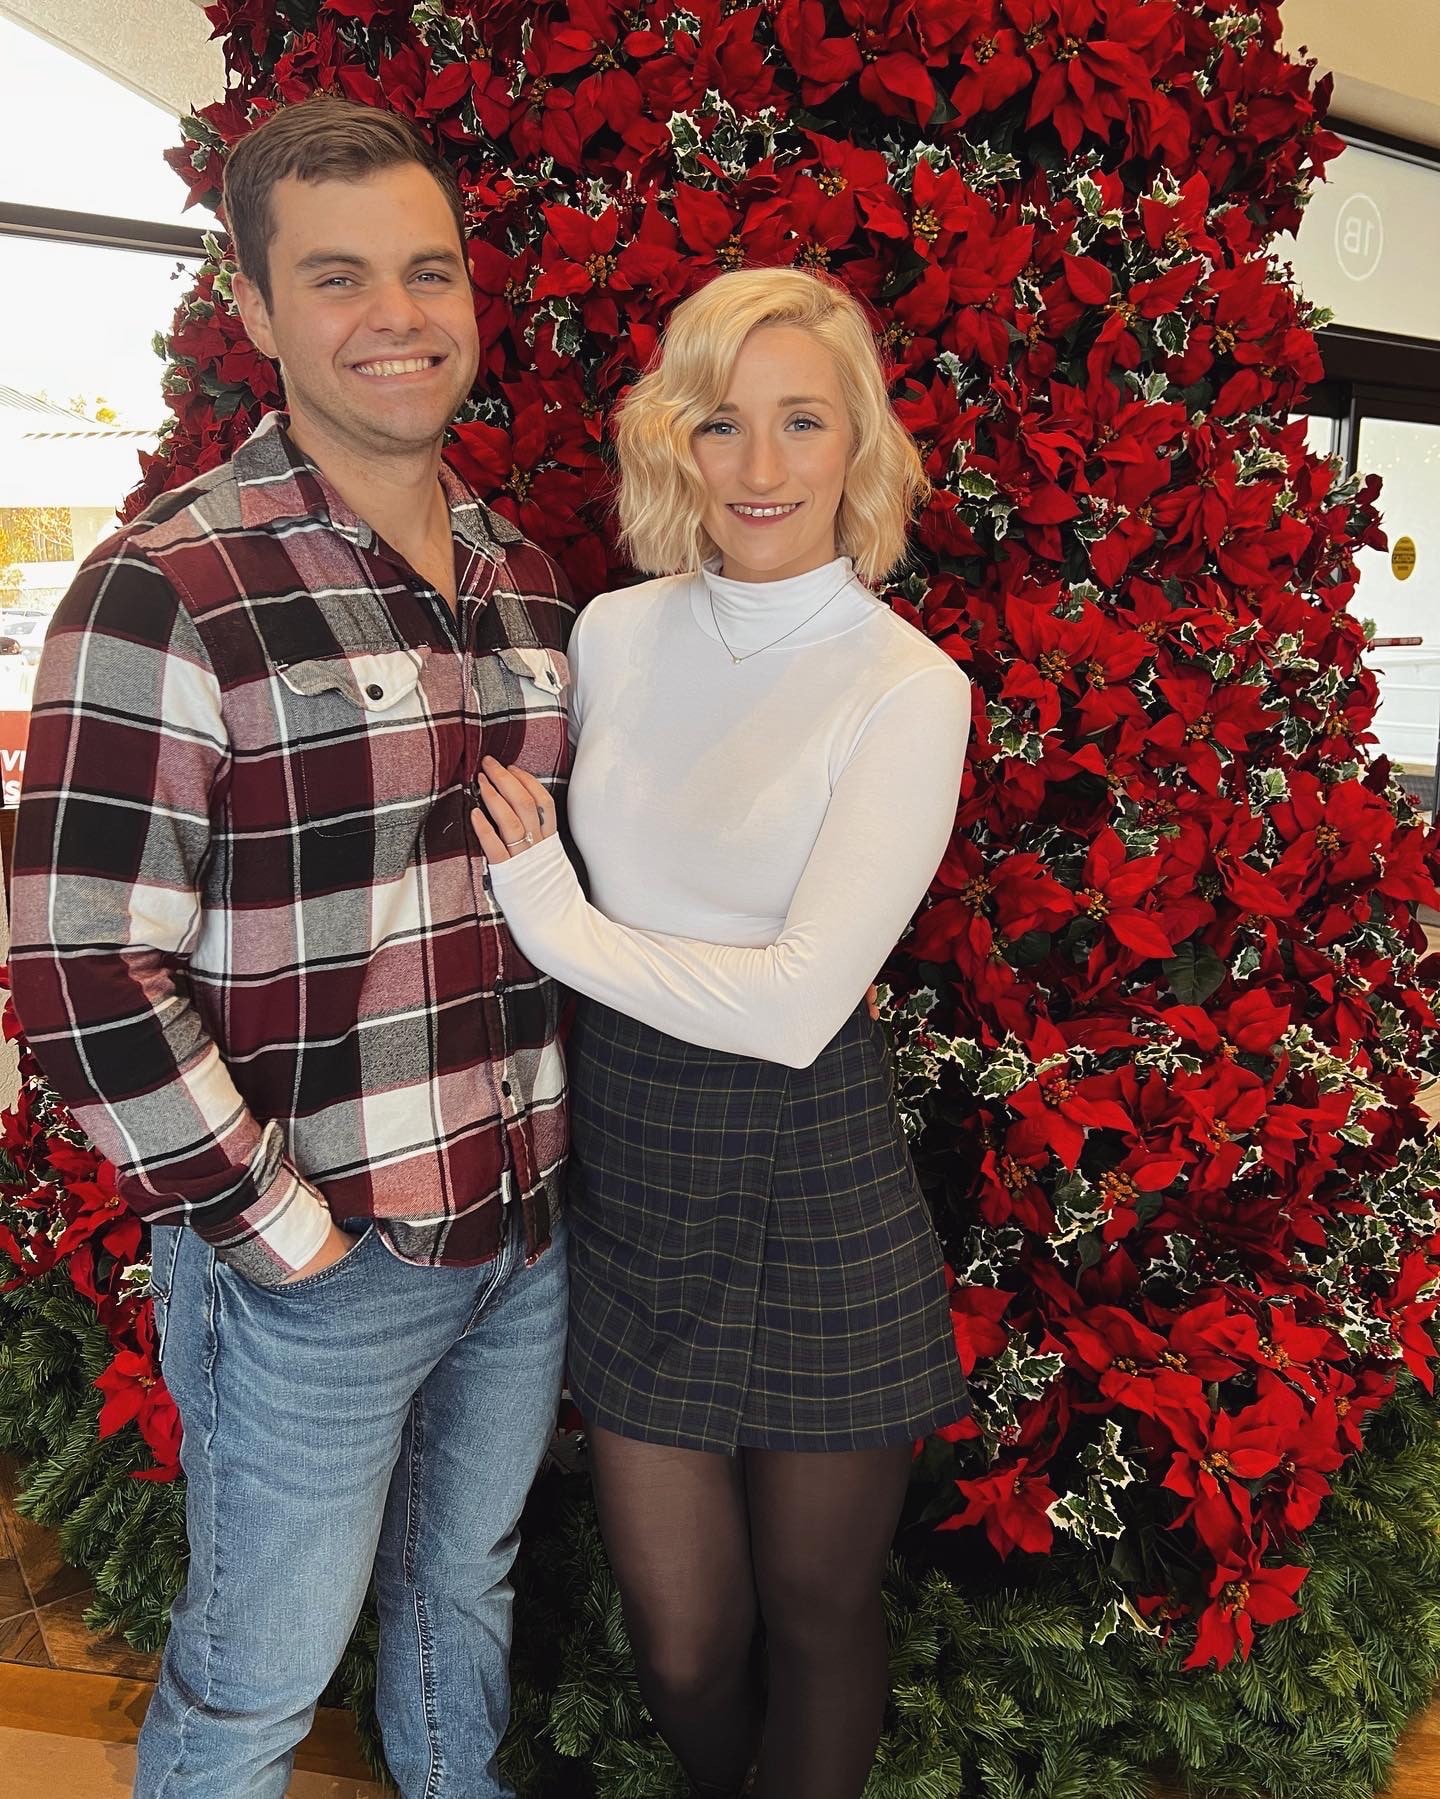 Couple poses for a photo together in front of a red Poinsette tree